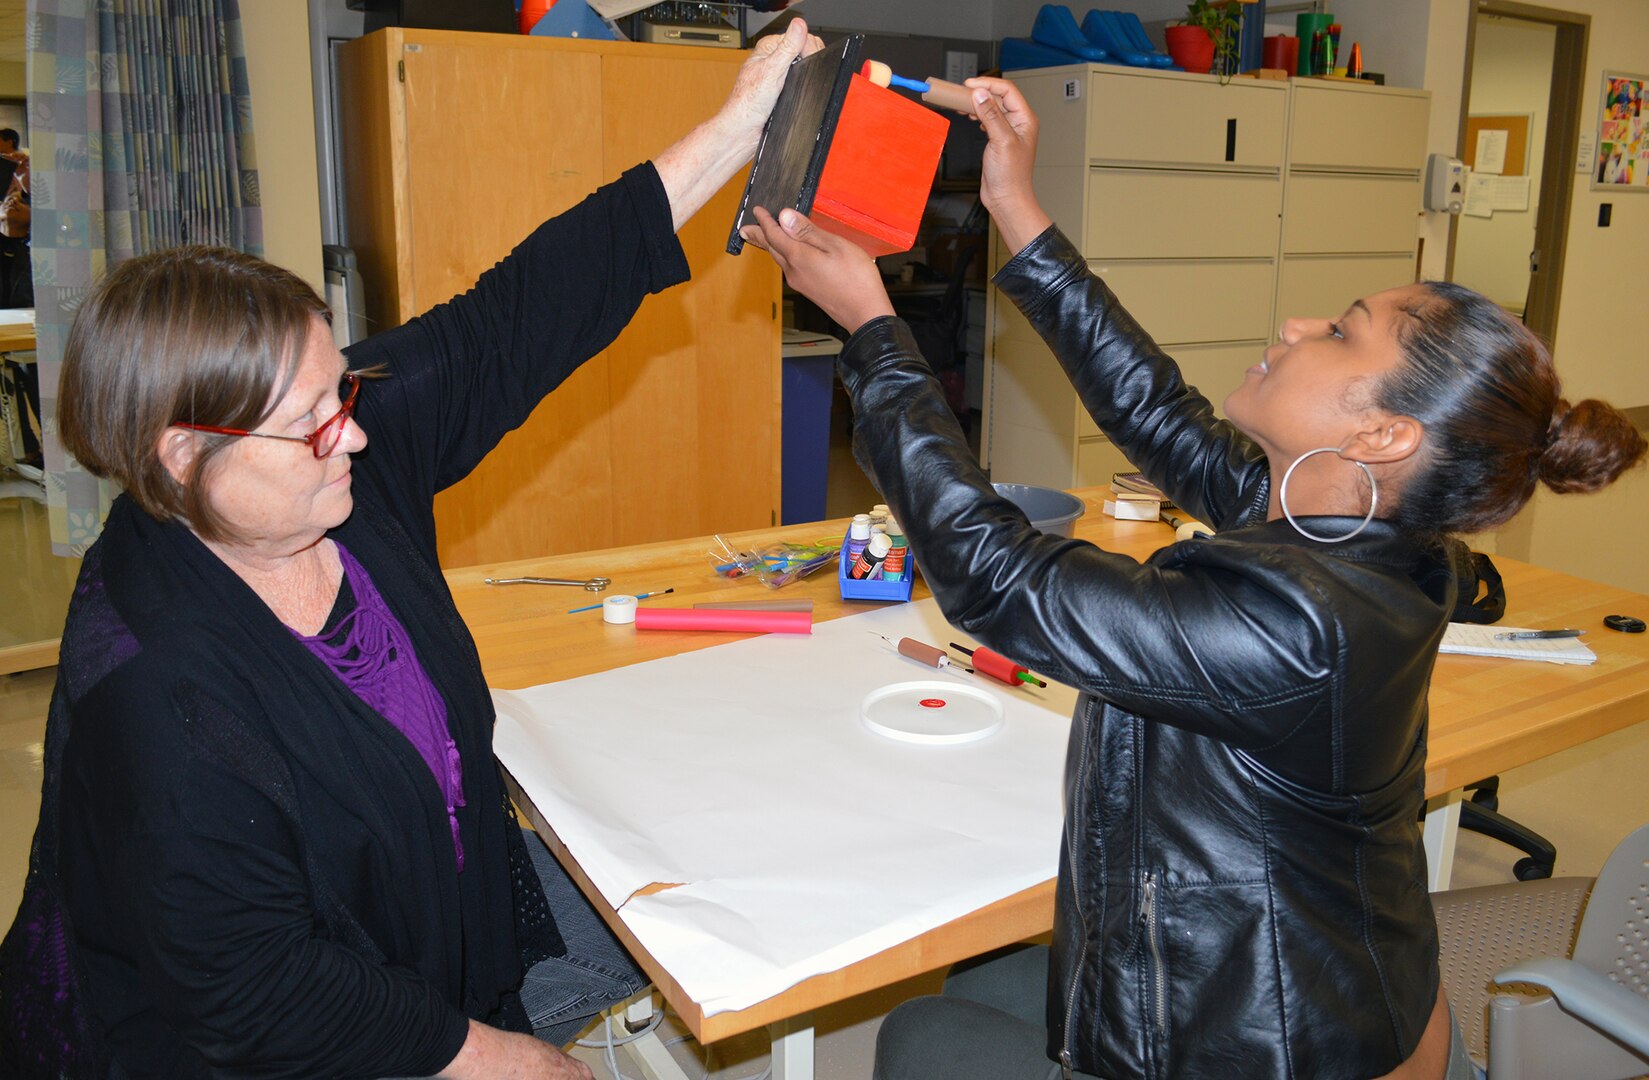 Linda Voronin (right), certified occupational therapy assistant, works with Velicia Siggers on a functional activity March 27 at the BAMC Outpatient Occupational Therapy Clinic. Occupational therapy centers on the targeted use of activities (like painting a bird house) to increase individual overall functioning.  Occupational therapy believes that it’s not enough to only increase an individual’s strength or endurance; rather, it’s more important to allow an individual to get back to engaging in personally-meaningful activities.